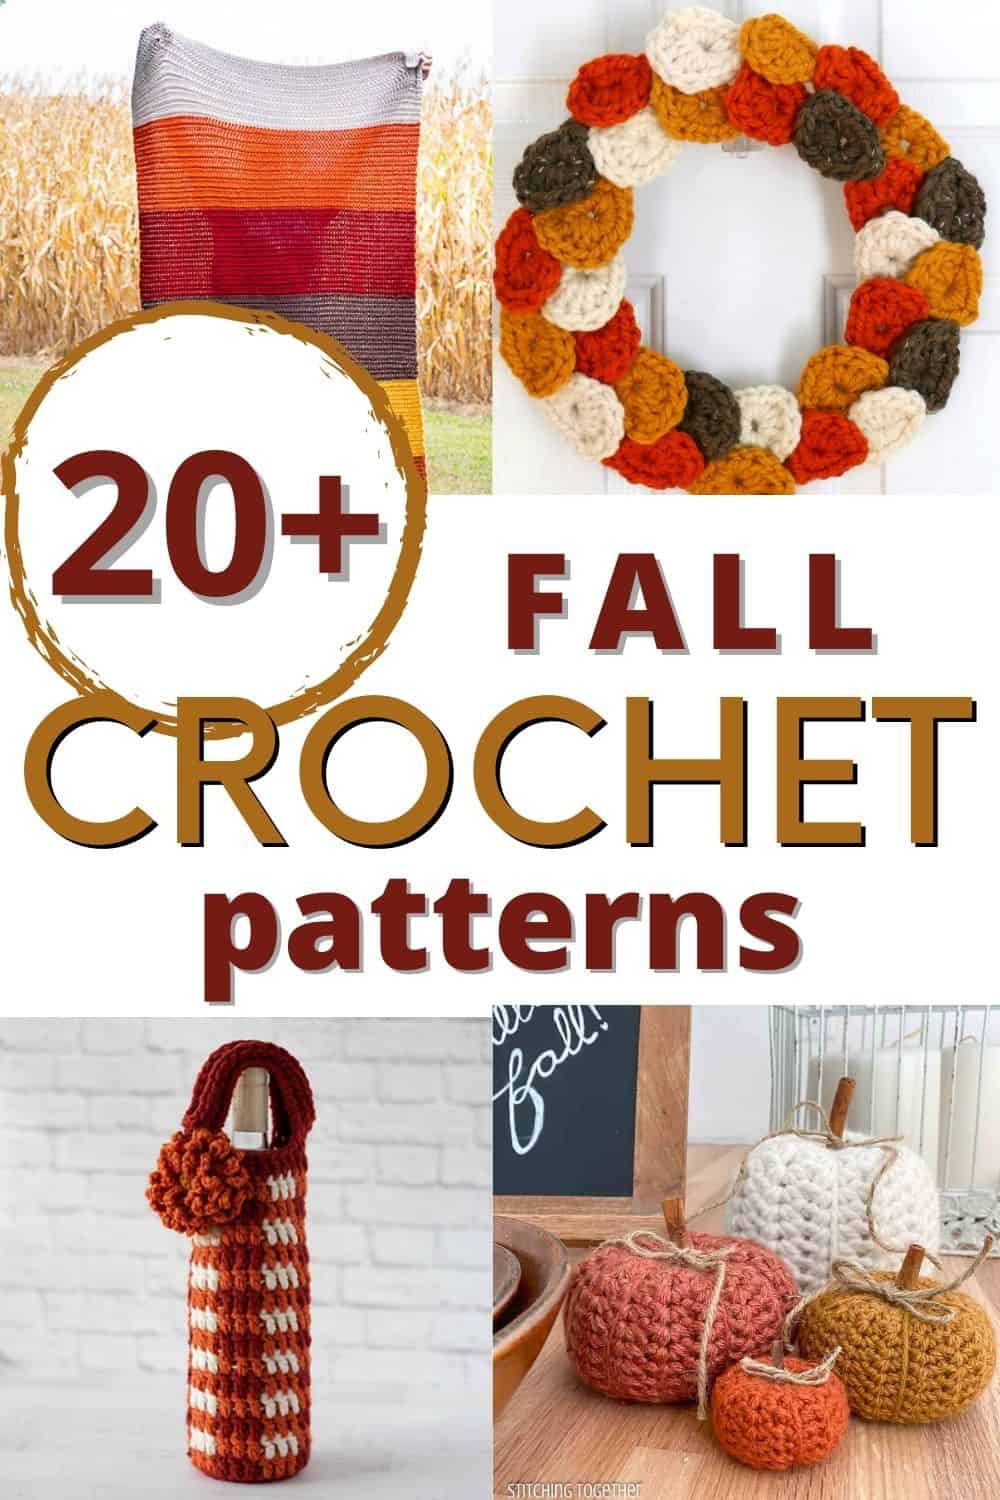 graphic reading "20+ fall crochet patterns with images